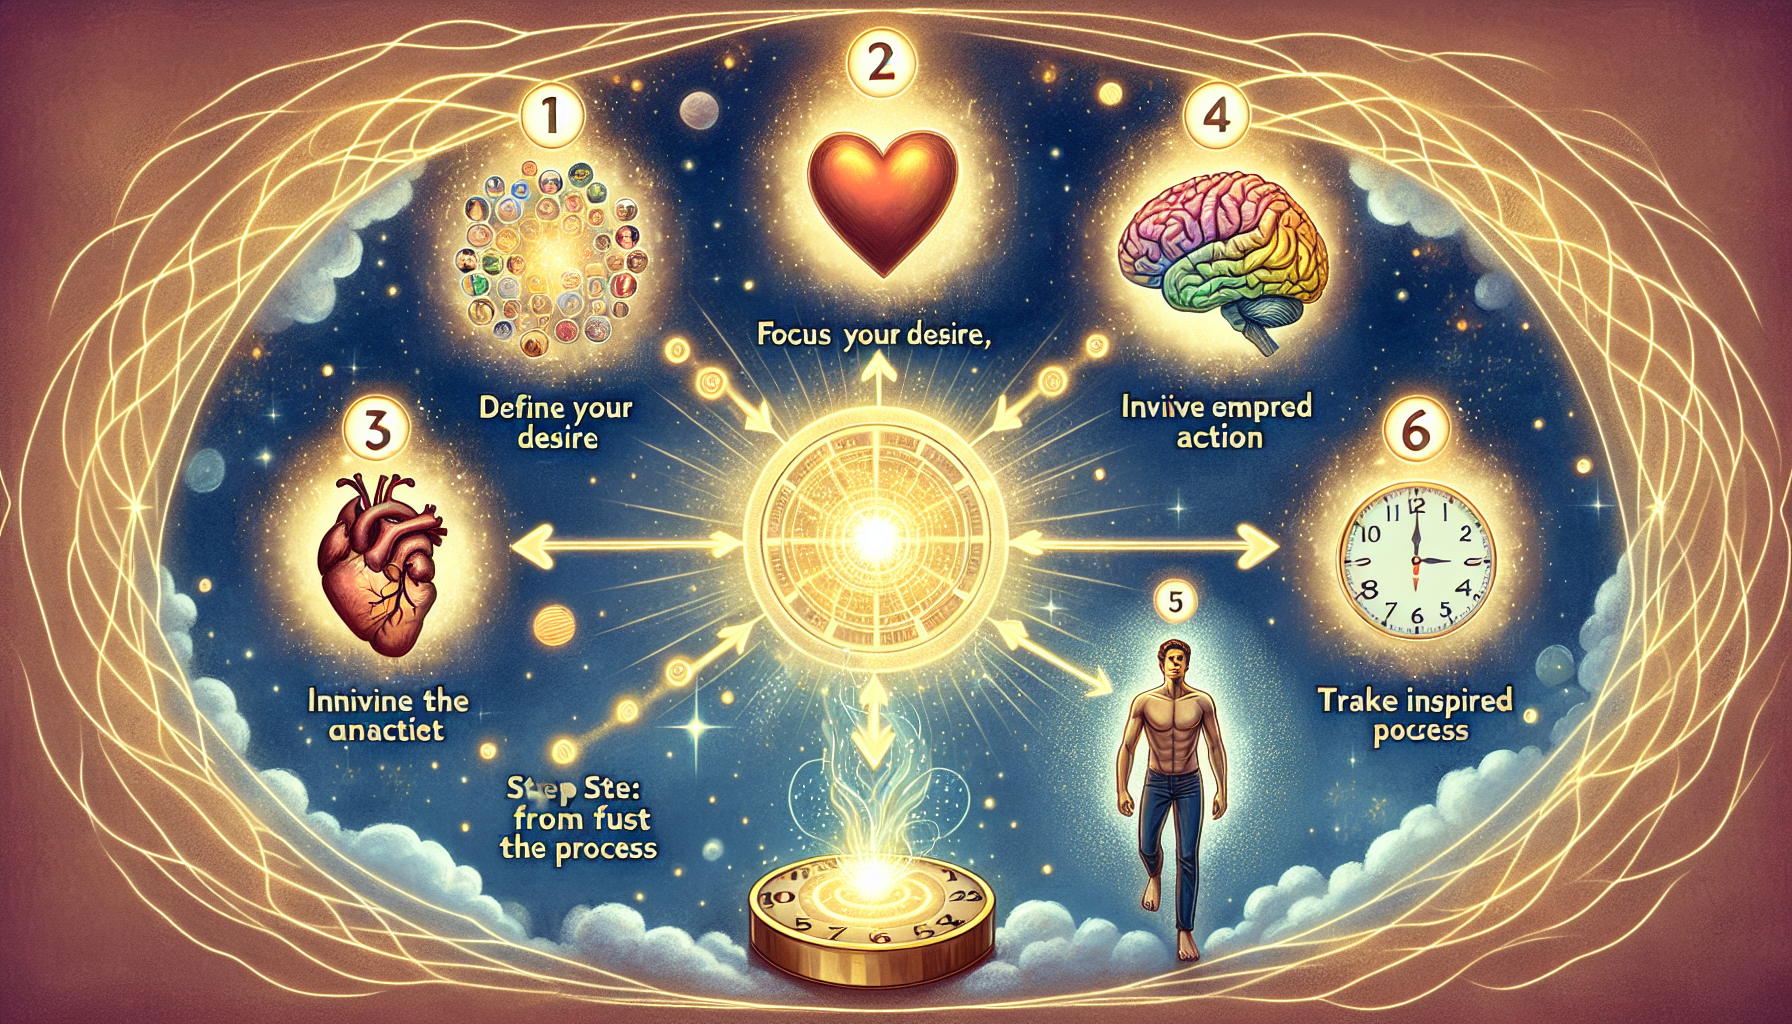 A visualization depicting five steps to manifesting desires using the Law of Attraction. Step 1: Define Your Desire, shown as a thought bubble filled with various personal goals. Step 2: Focus Your Thoughts, represented by a focused brain emitting positive energy. Step 3: Invoke Emotion, displayed via a heart radiating warmth and happiness. Step 4: Take Inspired Action, shown as a person of South Asian descent taking a step forward. Step 5: Trust the Process, represented by a clock symbolizing patience. Each step is numbered and connected via a golden path.